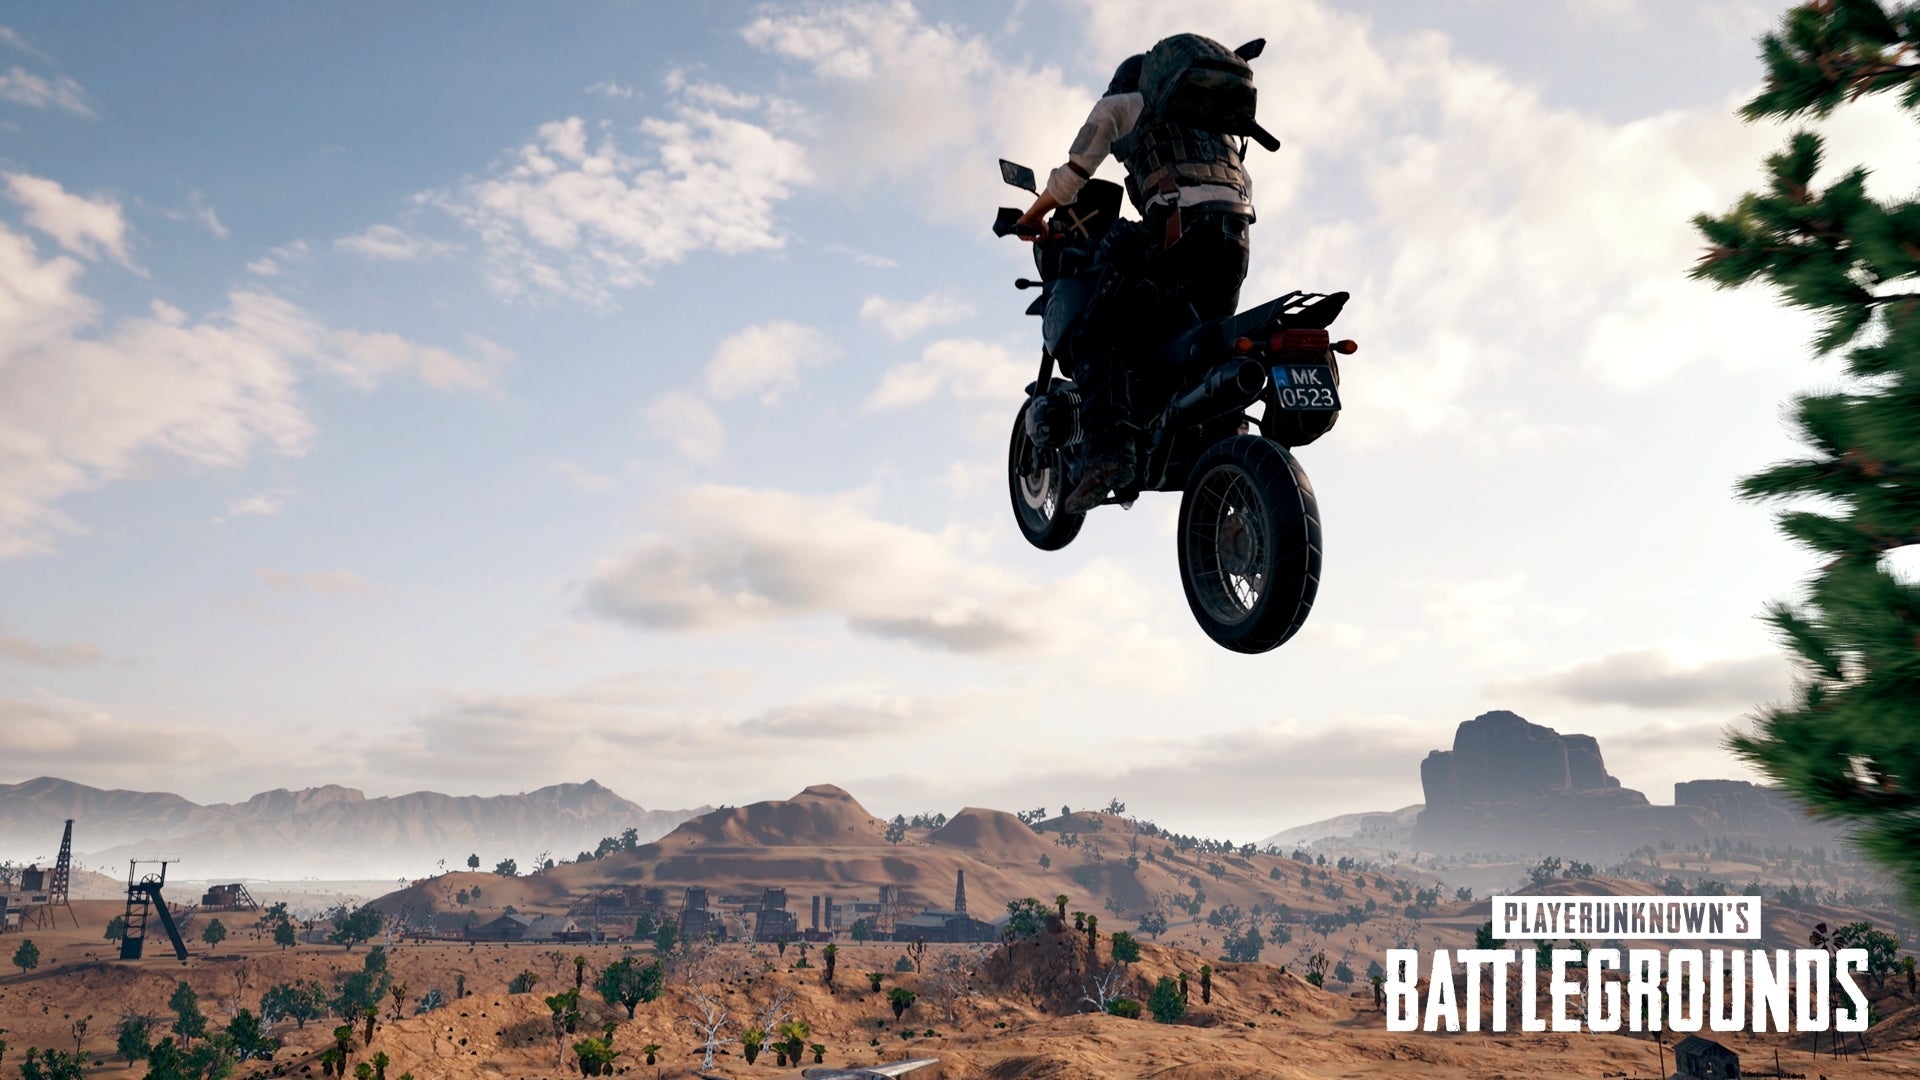 Image for PUBG: ping-based matchmaking coming soon, PC test patch expands replay reporting, adds on-plane player counter